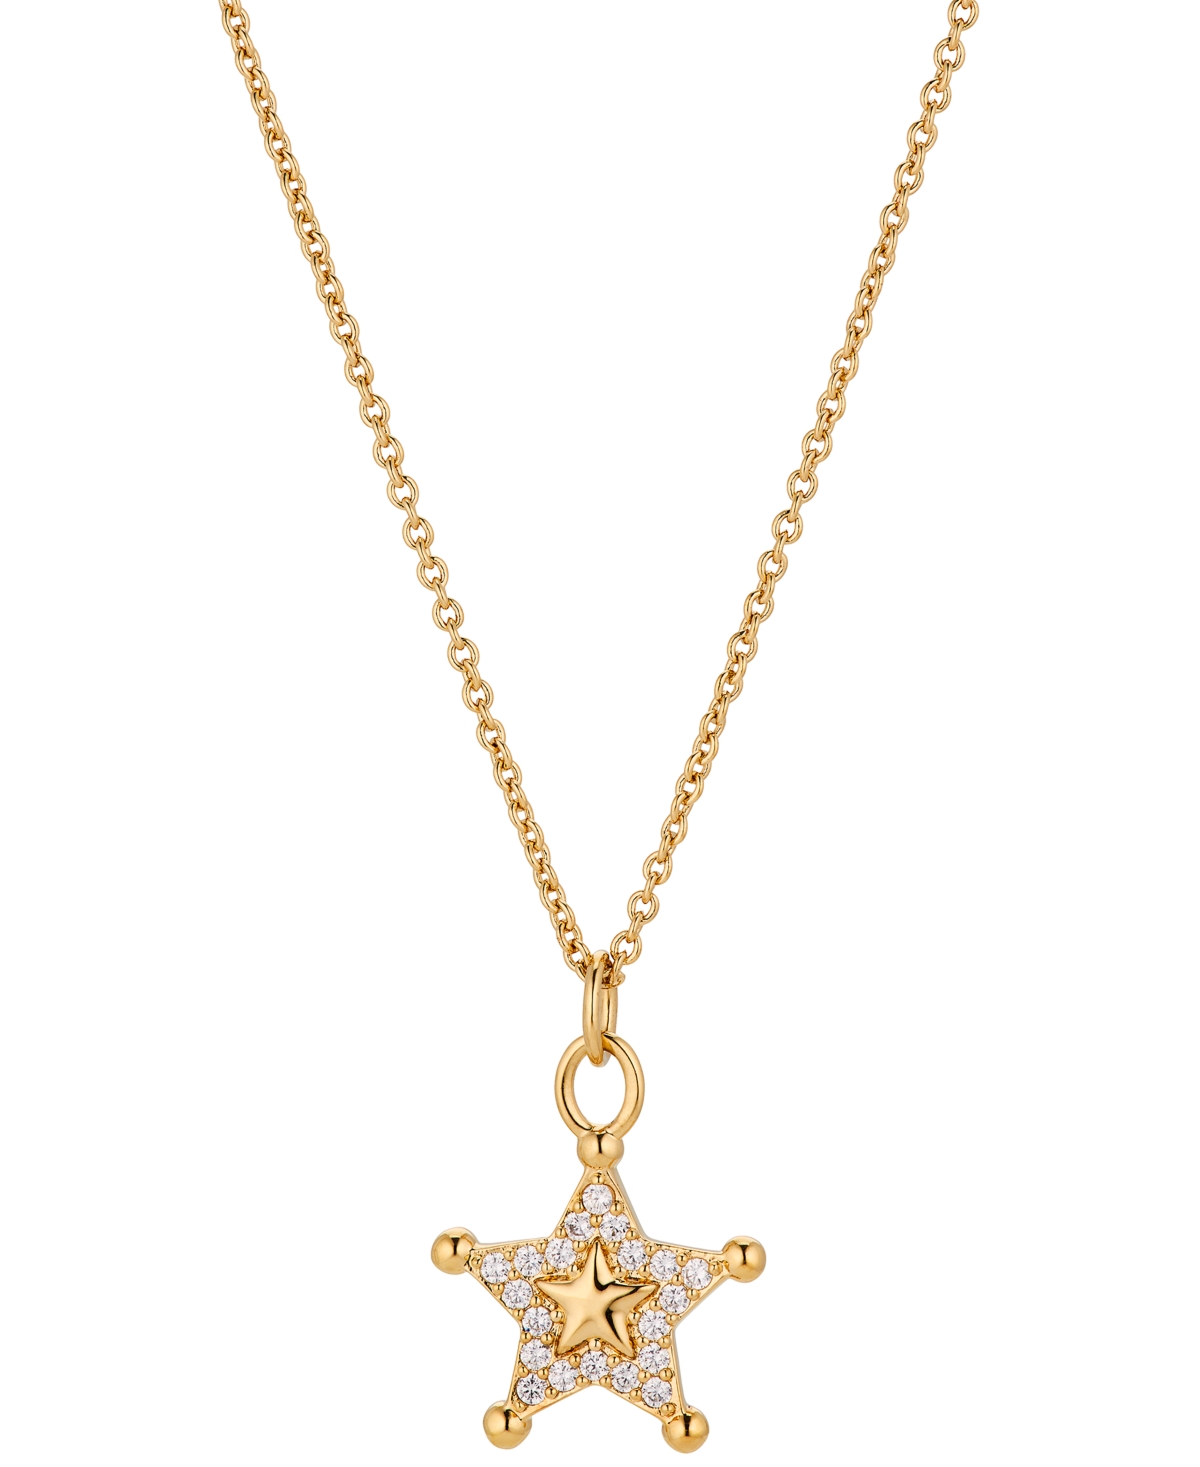 by Nadri 18k Gold-Plated Pave Sheriff Star Pendant Necklace, 16" + 2" extender - Gold